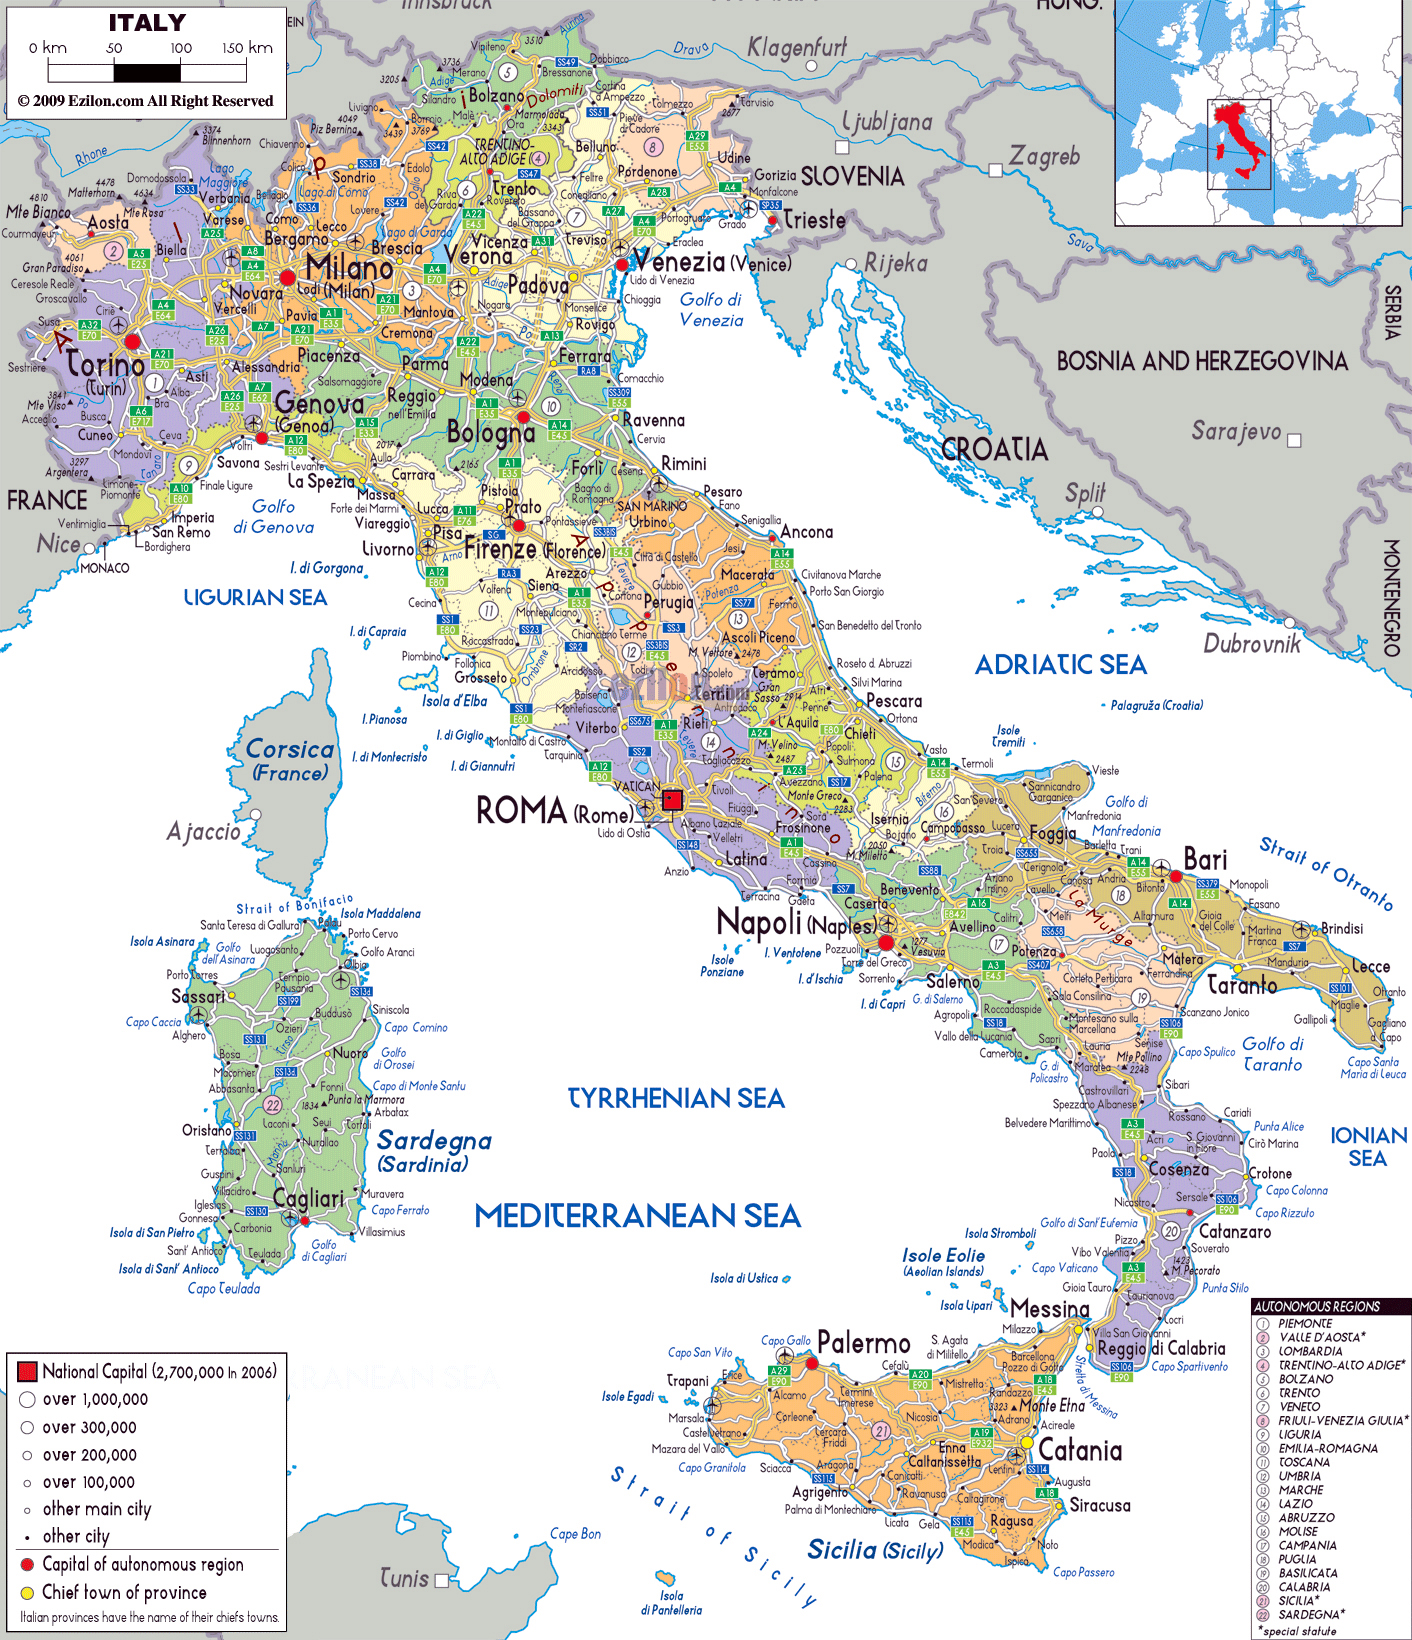 large-political-and-administrative-map-of-italy-with-roads-cities-and